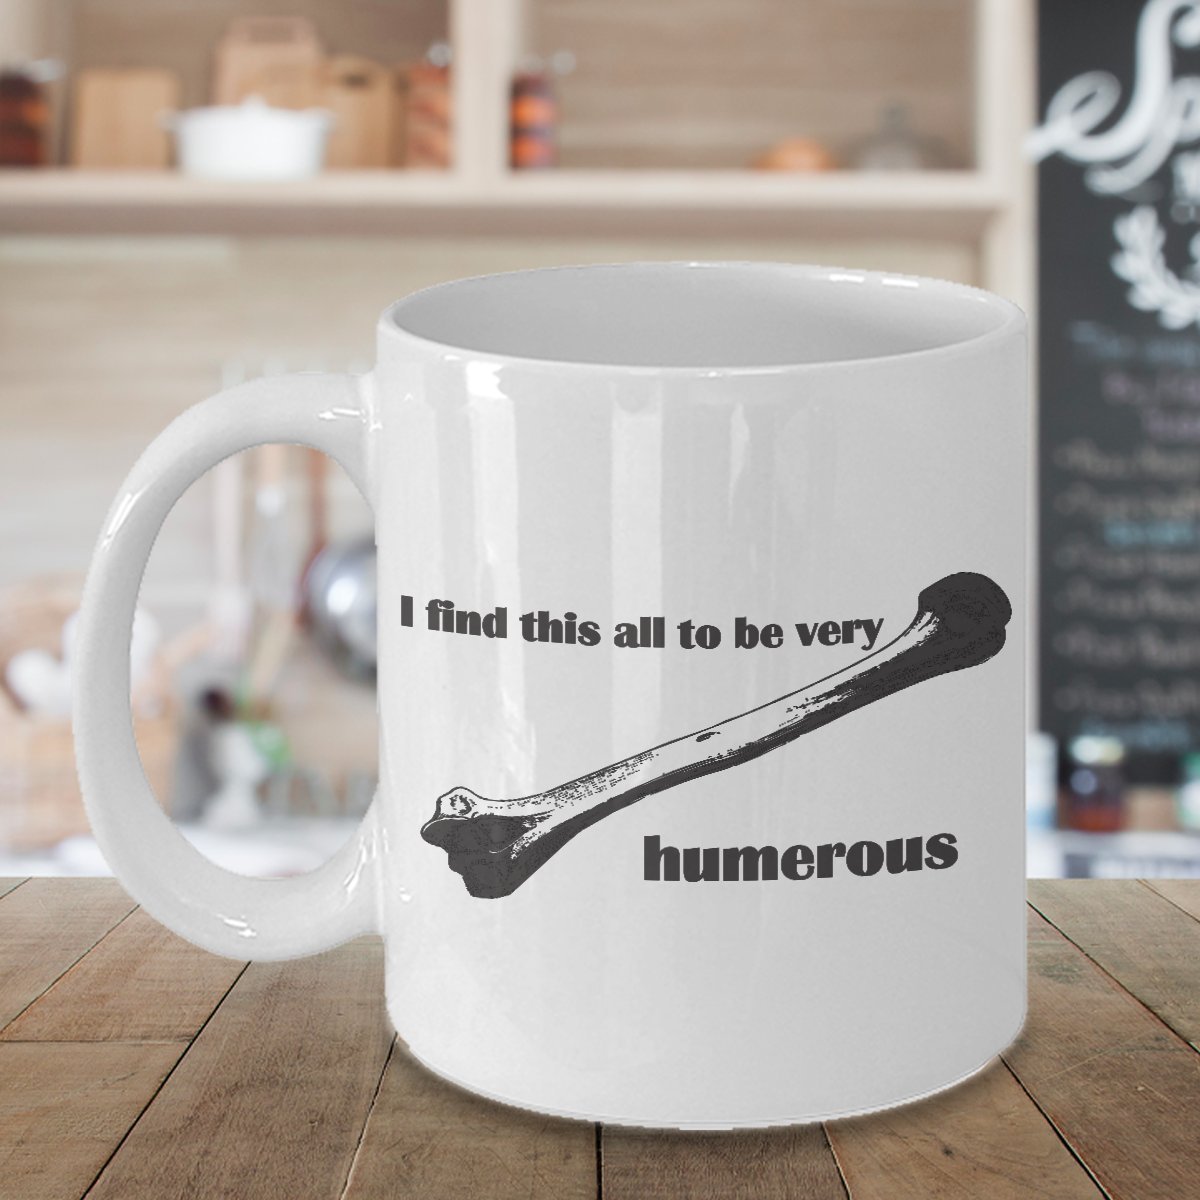 Radiologist Gifts - I Find This All To Be Very Humerous - Nurse Gift Ideas - Funny Coffee Mug by SpreadPassion